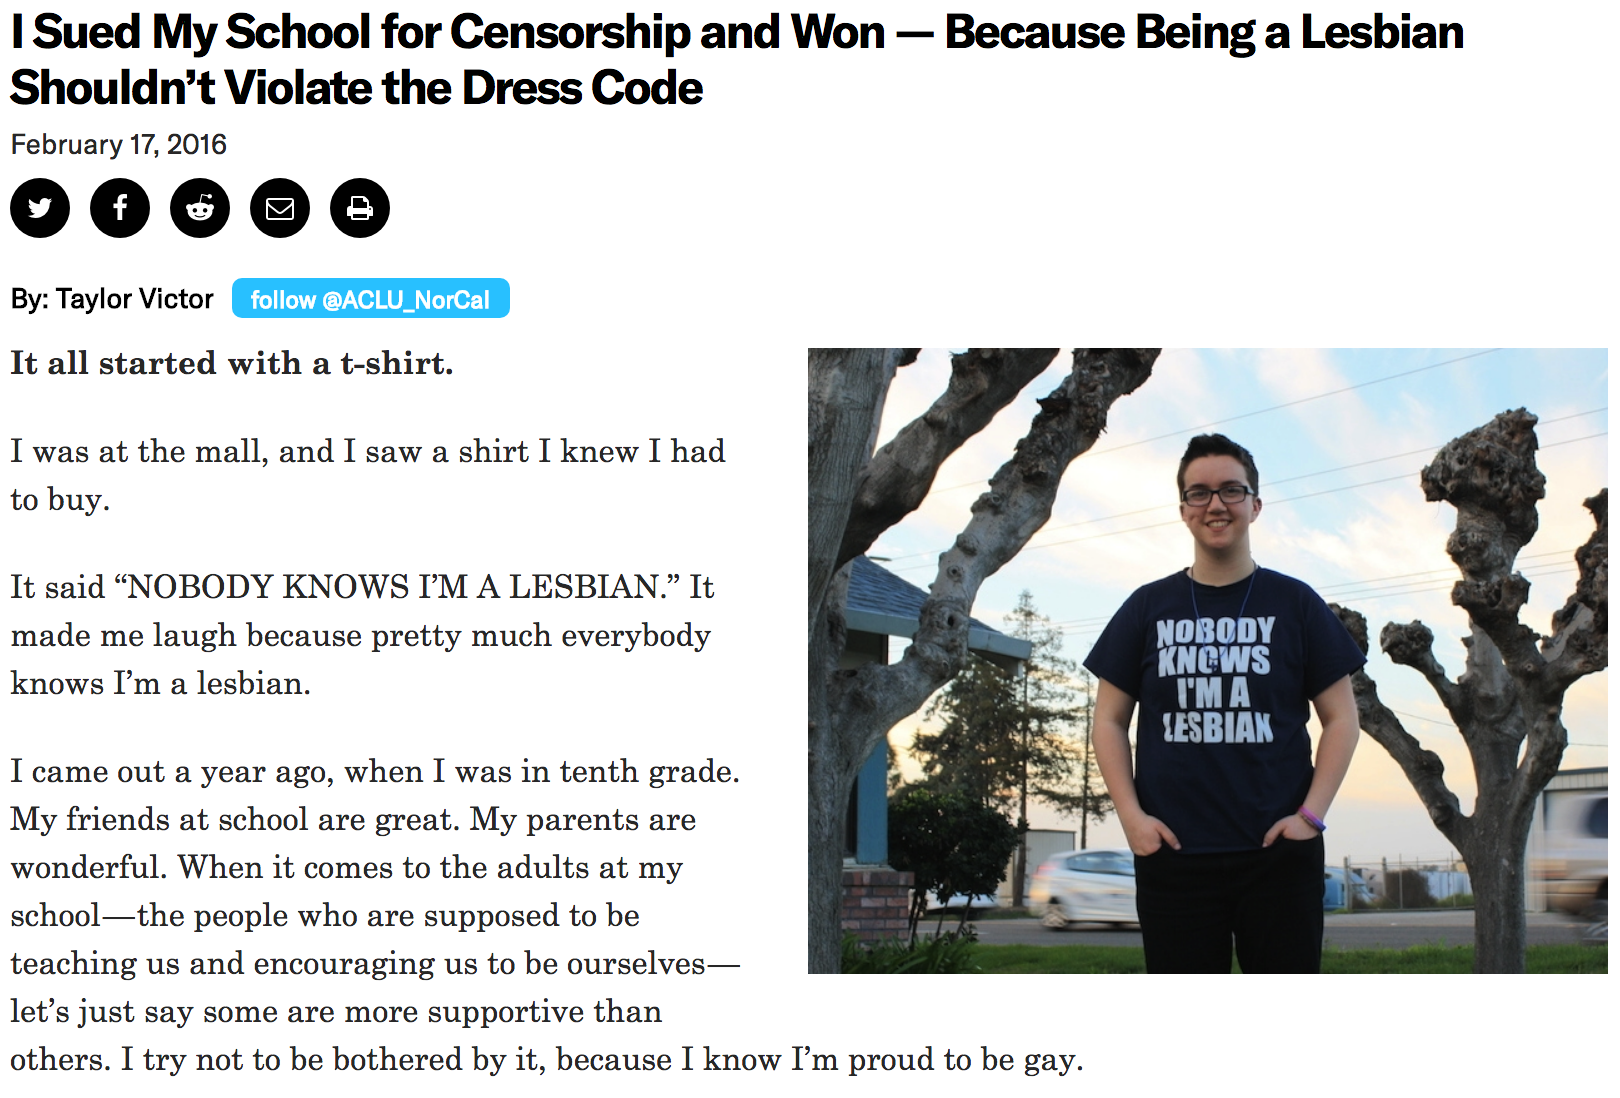 I Sued My School for Censorship Article